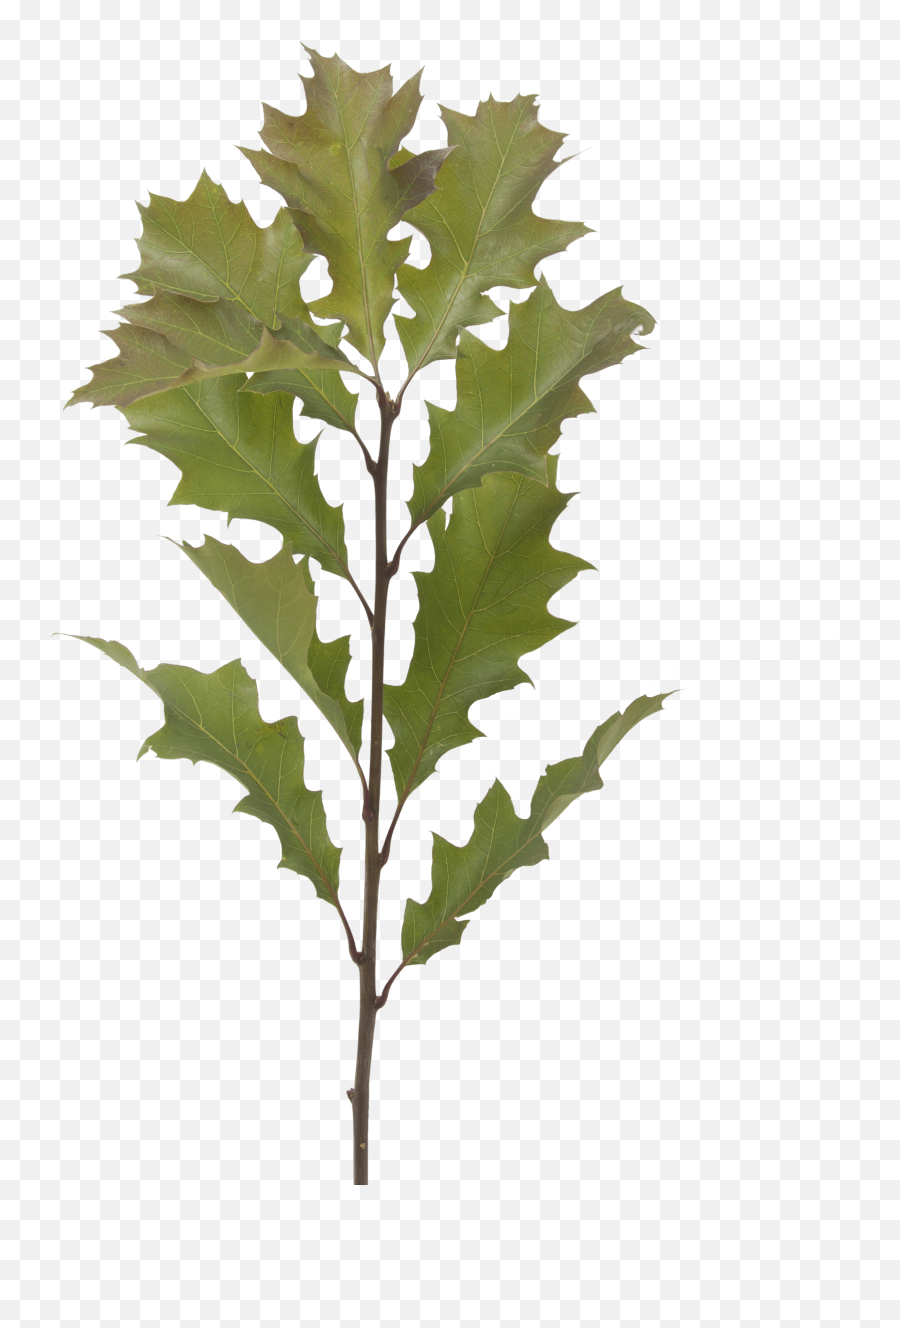 Download Hd Quercus Leaves - Maple Leaf Transparent Png Plants,Maple Leaf Transparent Background